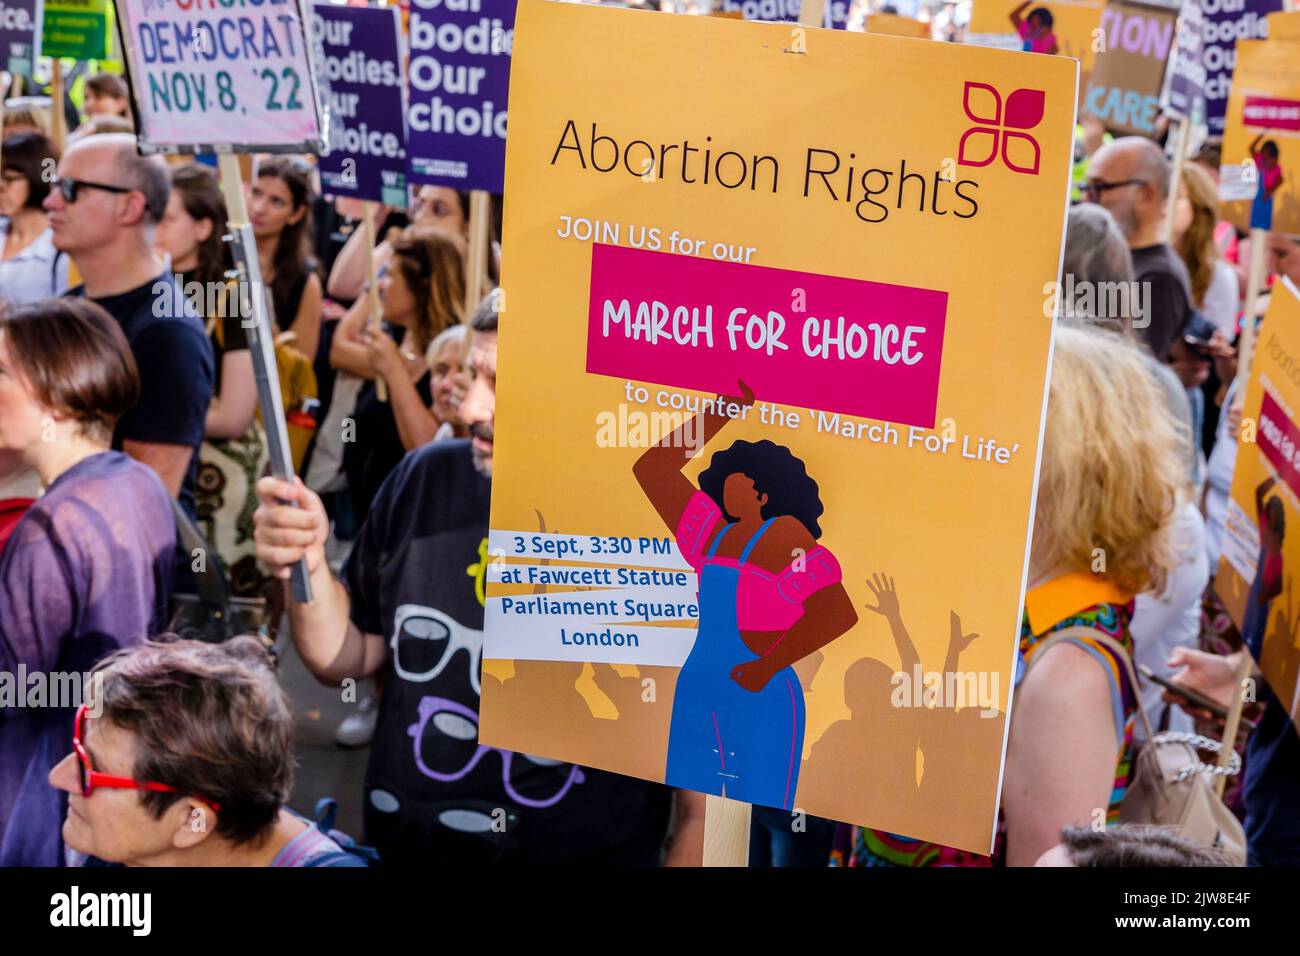 London, UK. 3 September 2022.  Pro-choice abortion campaigners display messaging of women's rights to choose during a March for Choice rally in Parliament Square in opposition to a rally also being held by anti-abortion campaign groups. Stock Photo